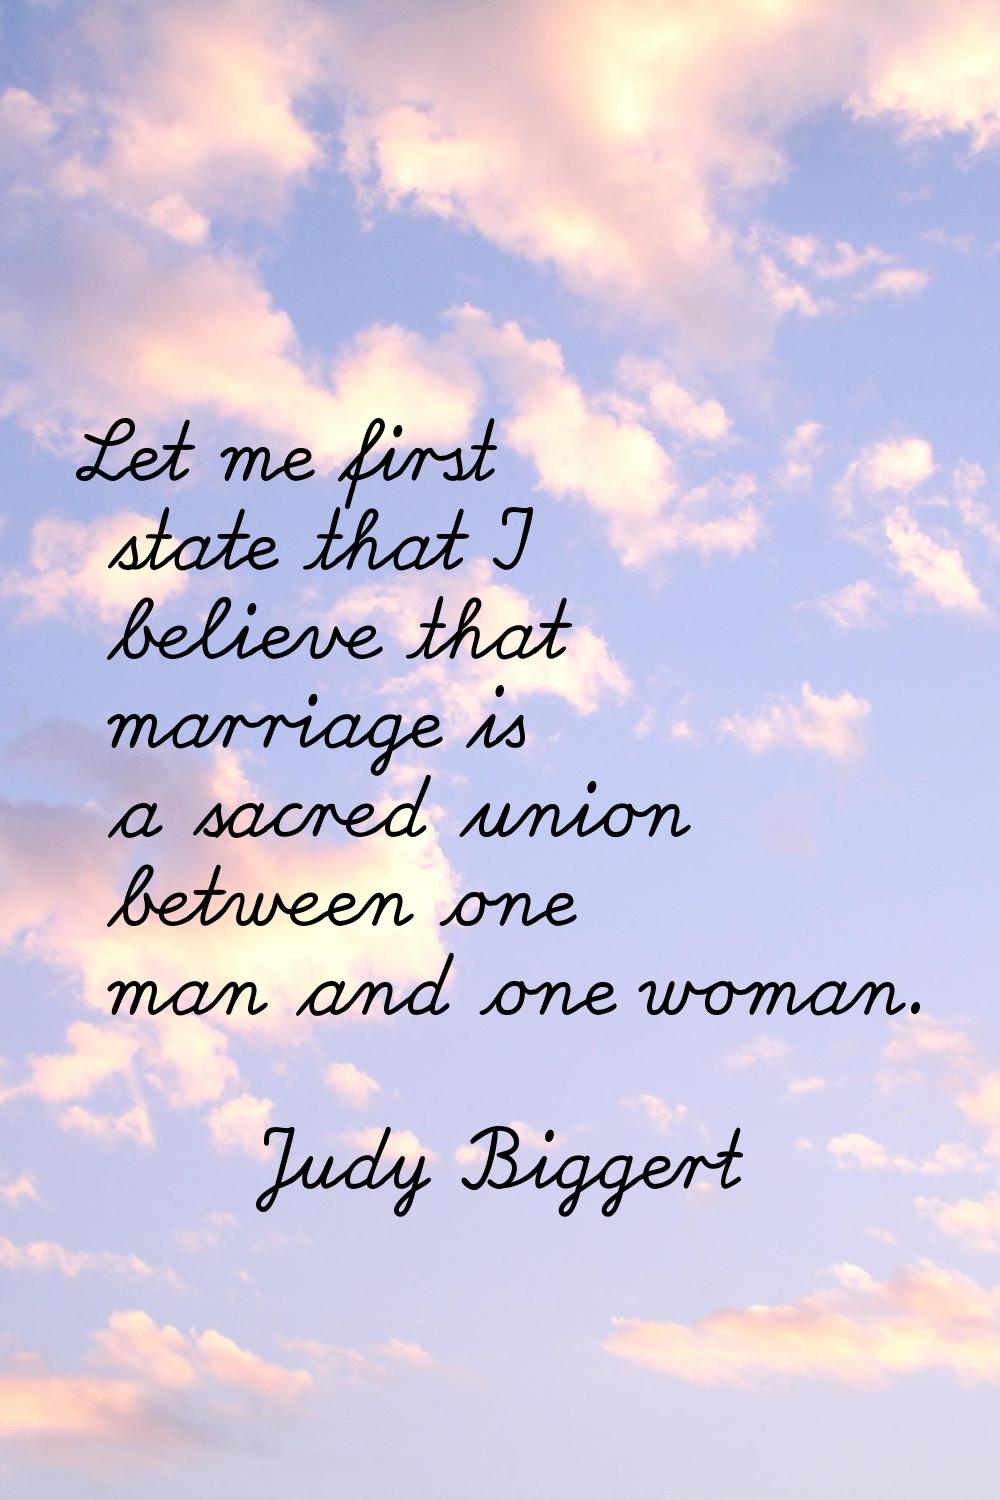 Let me first state that I believe that marriage is a sacred union between one man and one woman.